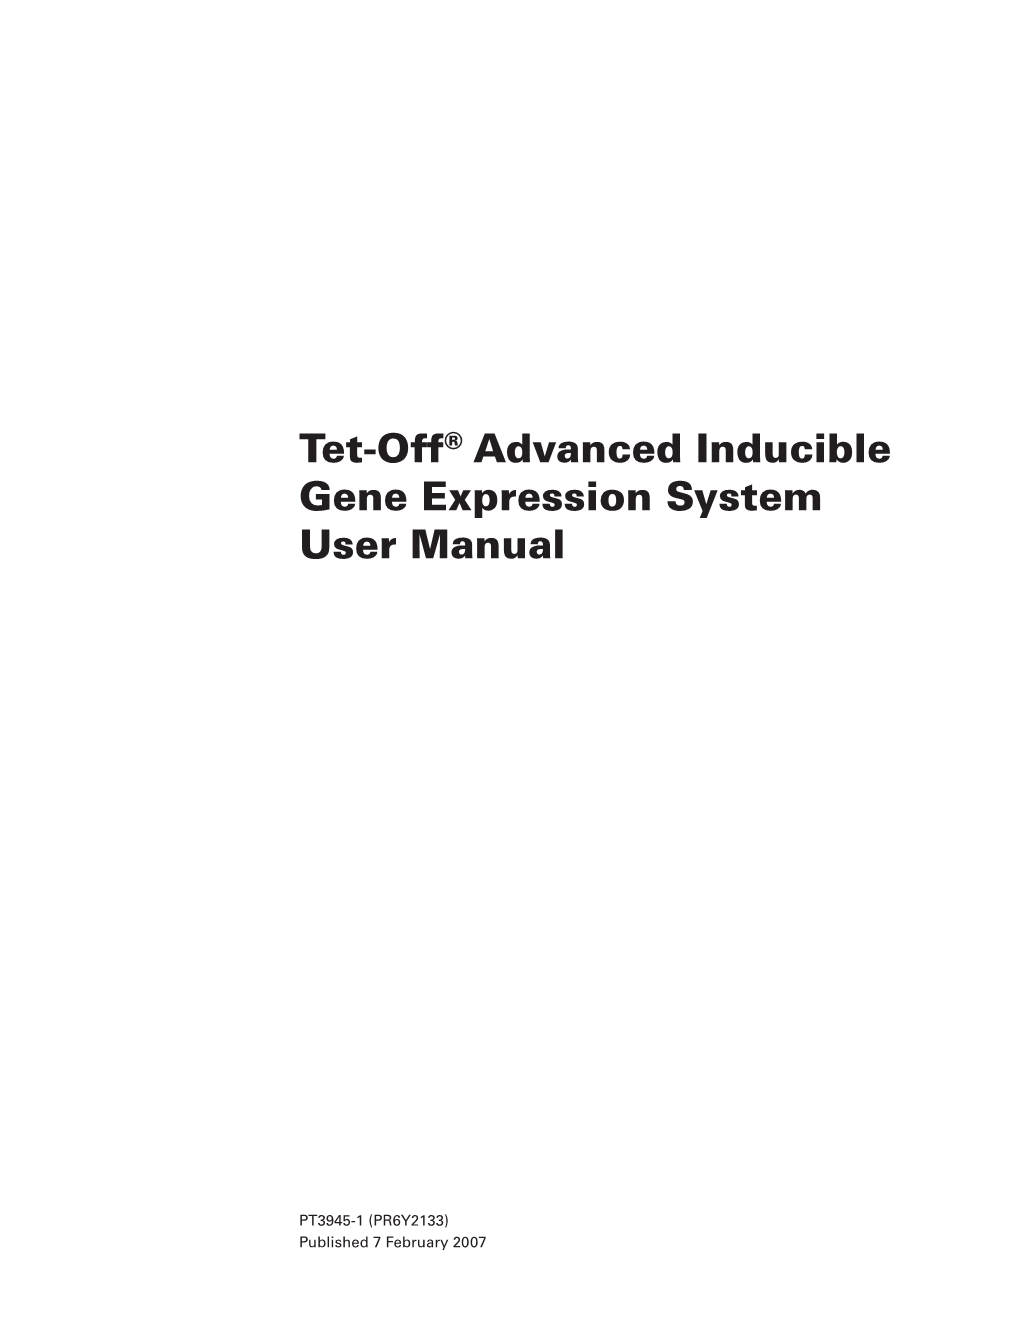 Tet-Off® Advanced Inducible Gene Expression System User Manual